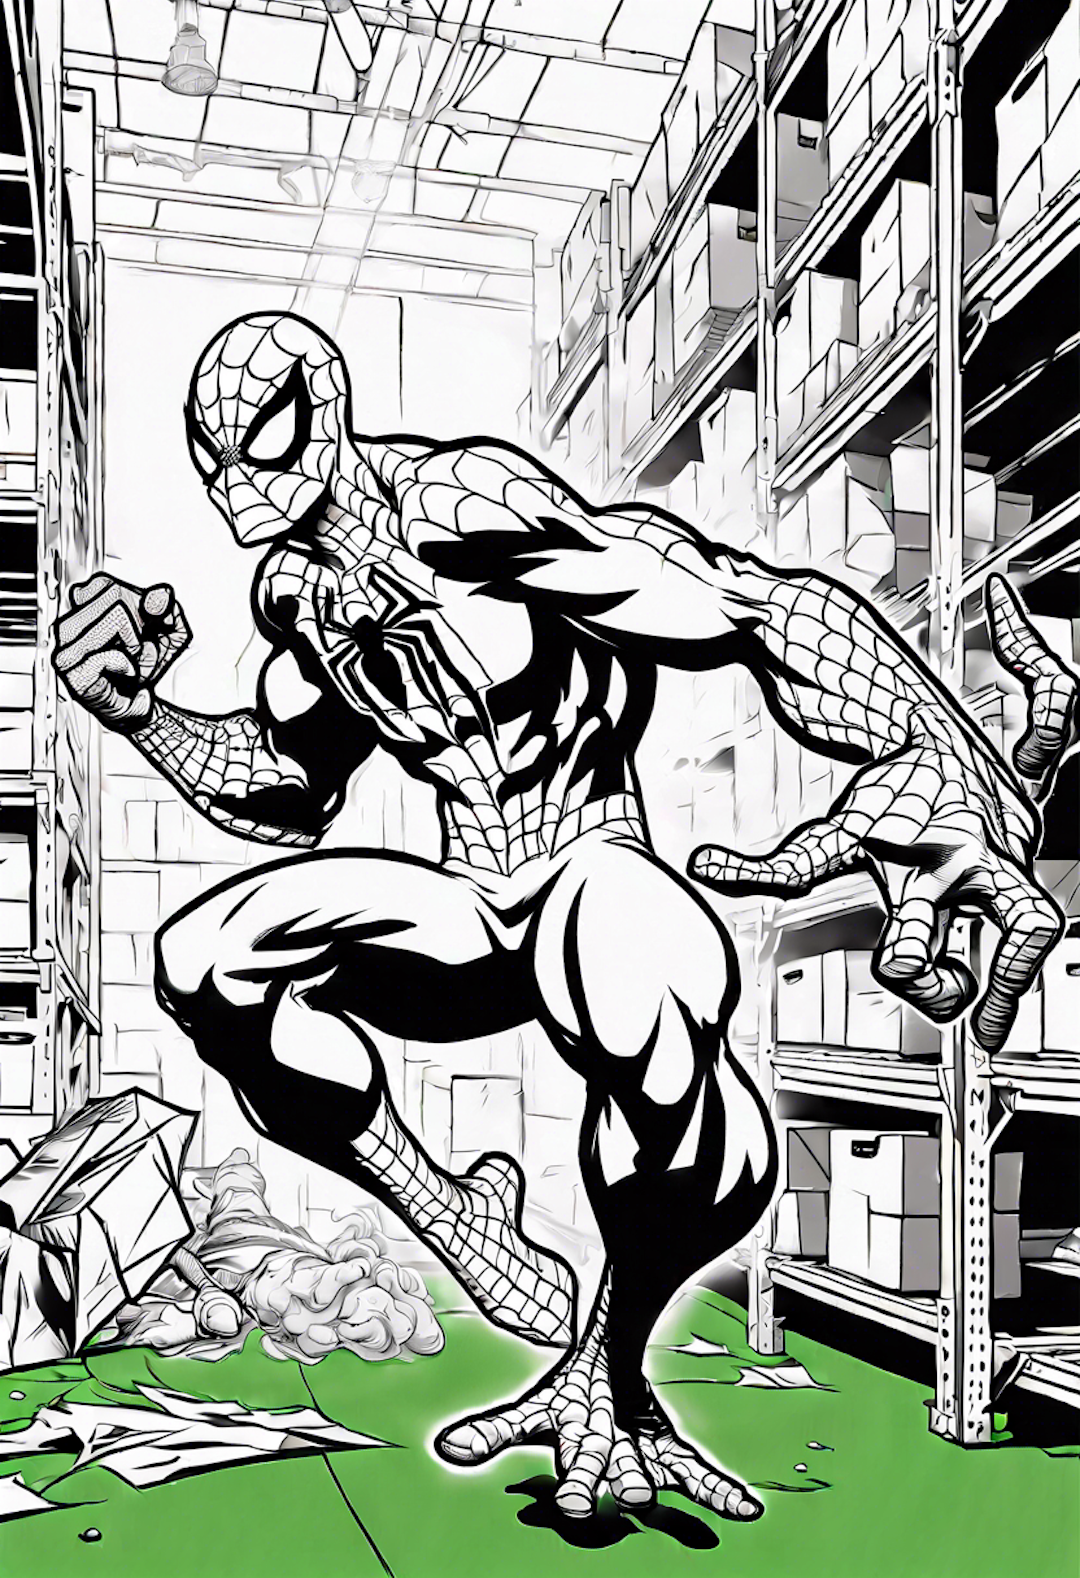 Spiderman Fighting Green Goblin In A Warehouse